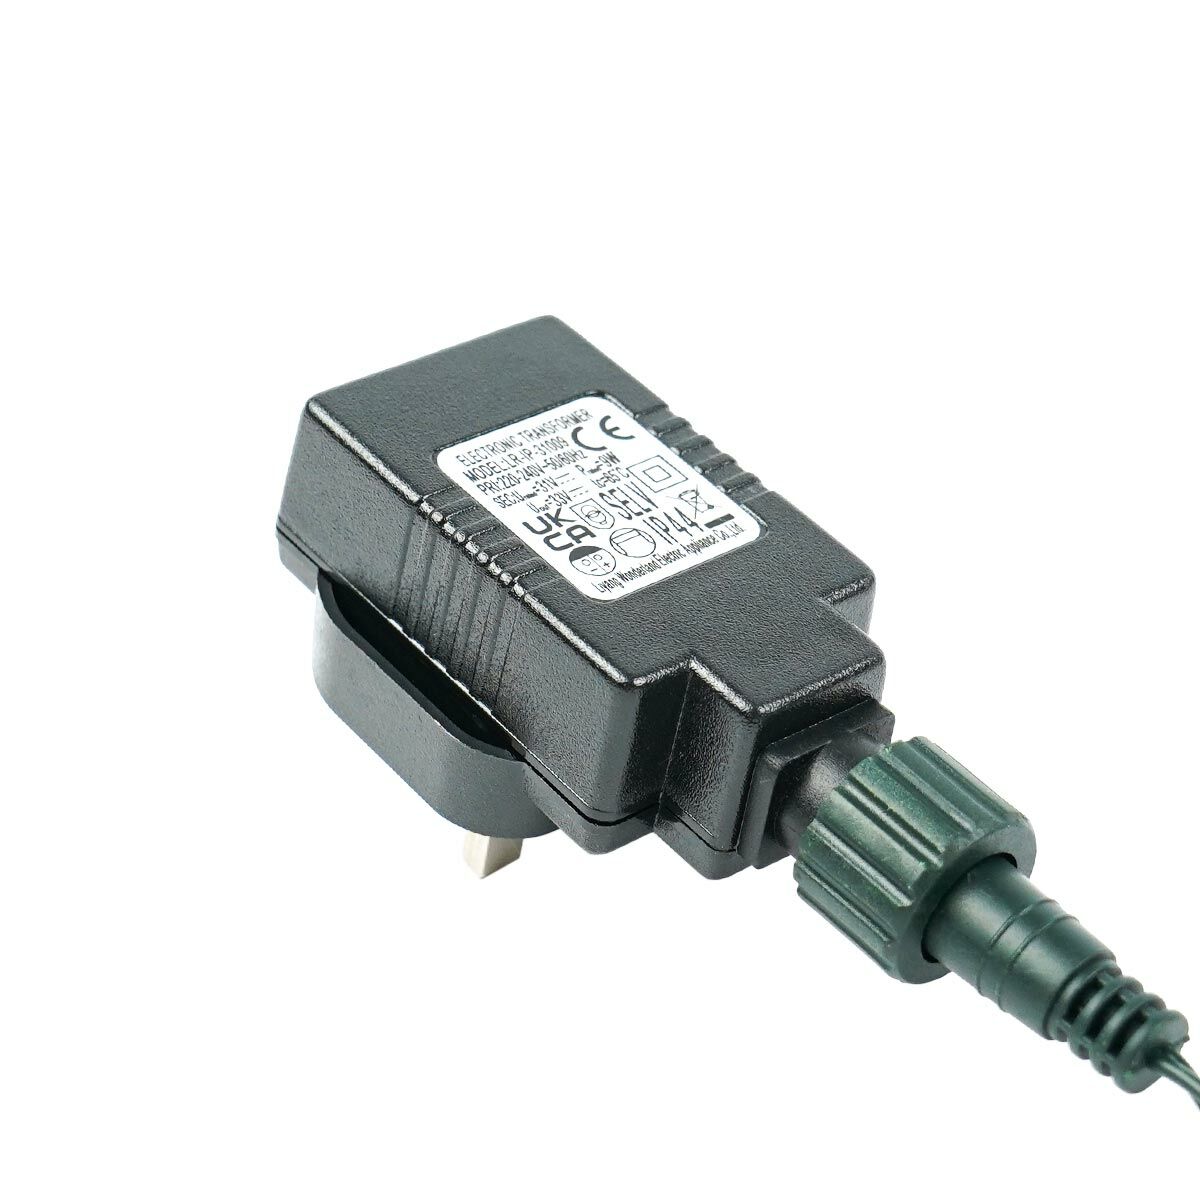 ConnectGo® Small Transformer, UK Plug, Green Cable with Remote Control image 2